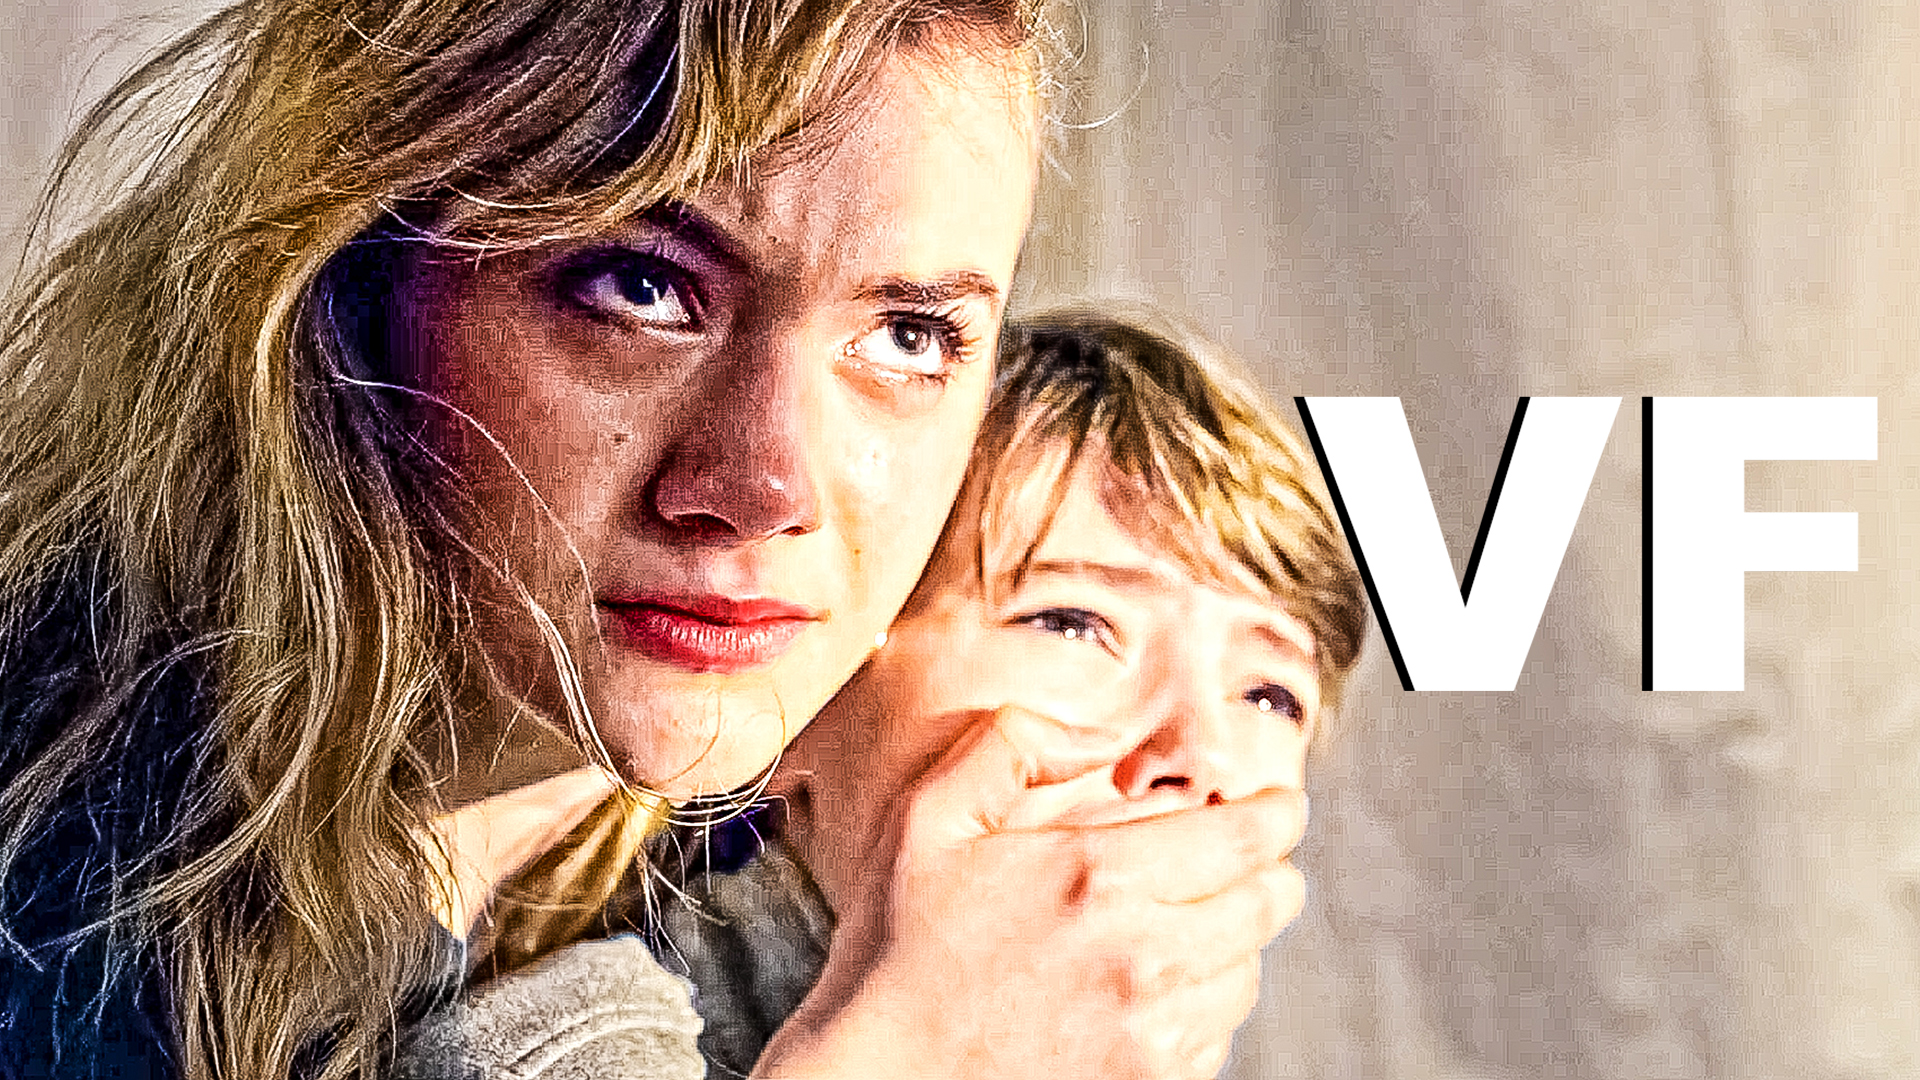 Serie vf. Week-end Family - Bande-annonce.